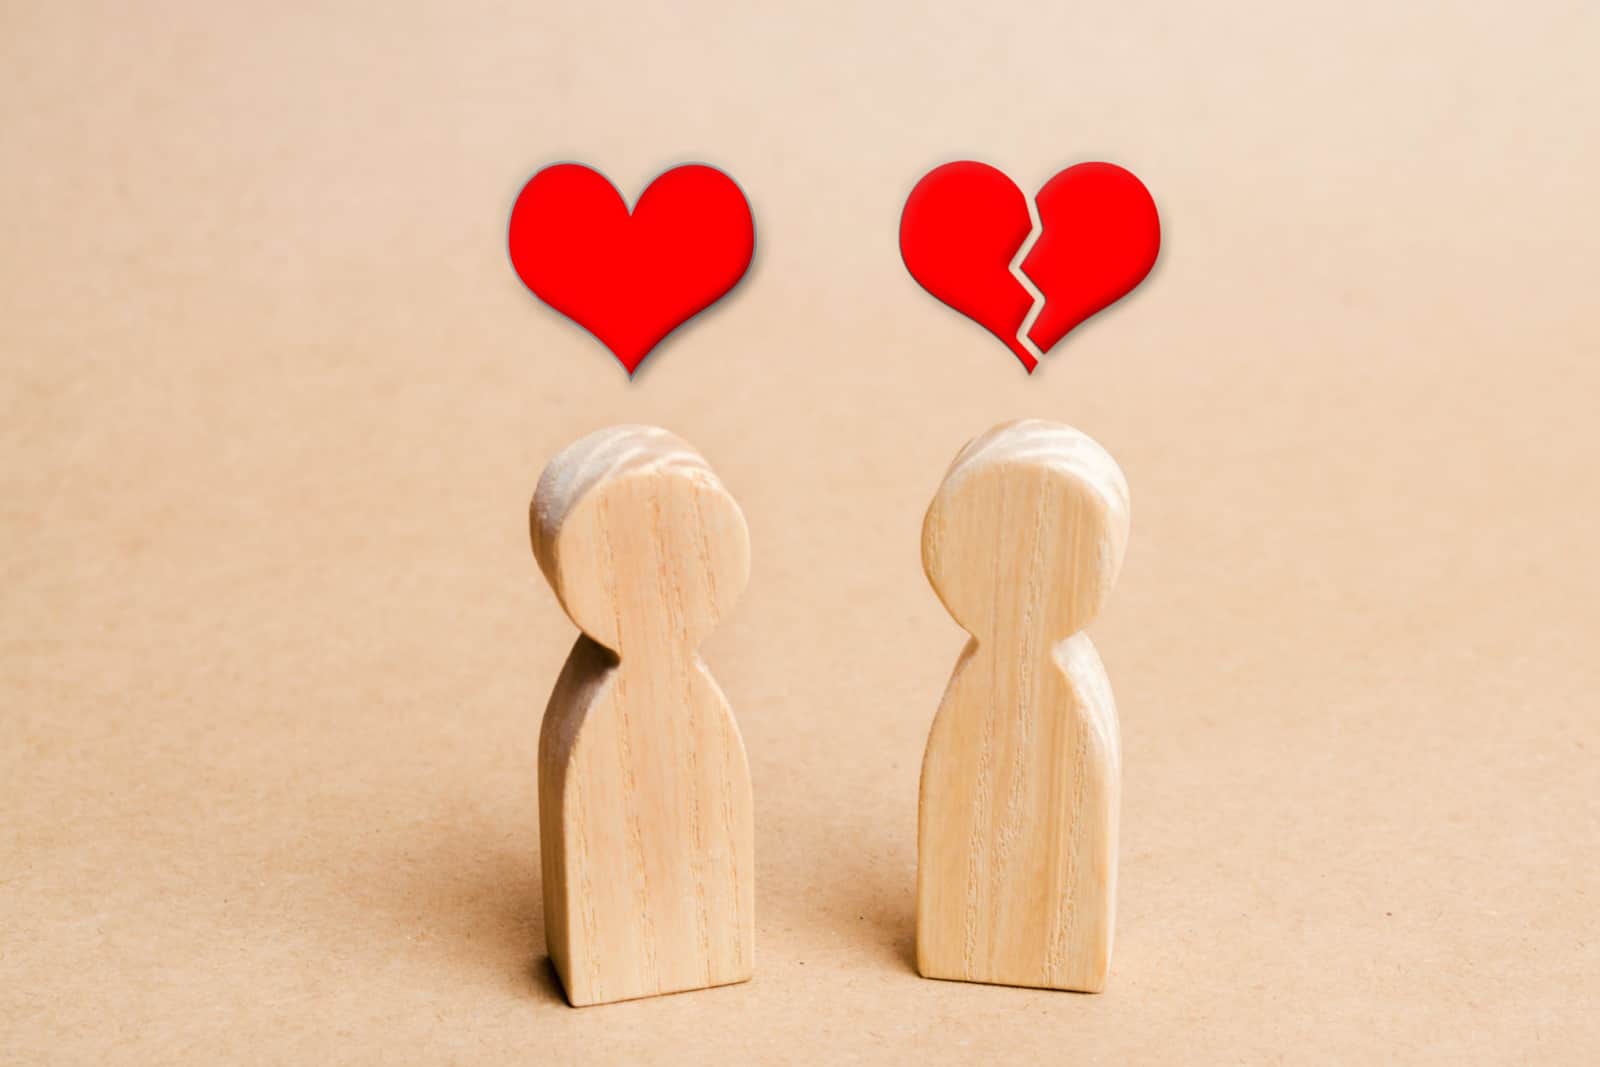 figures representing unrequited love or a one-sided relationship